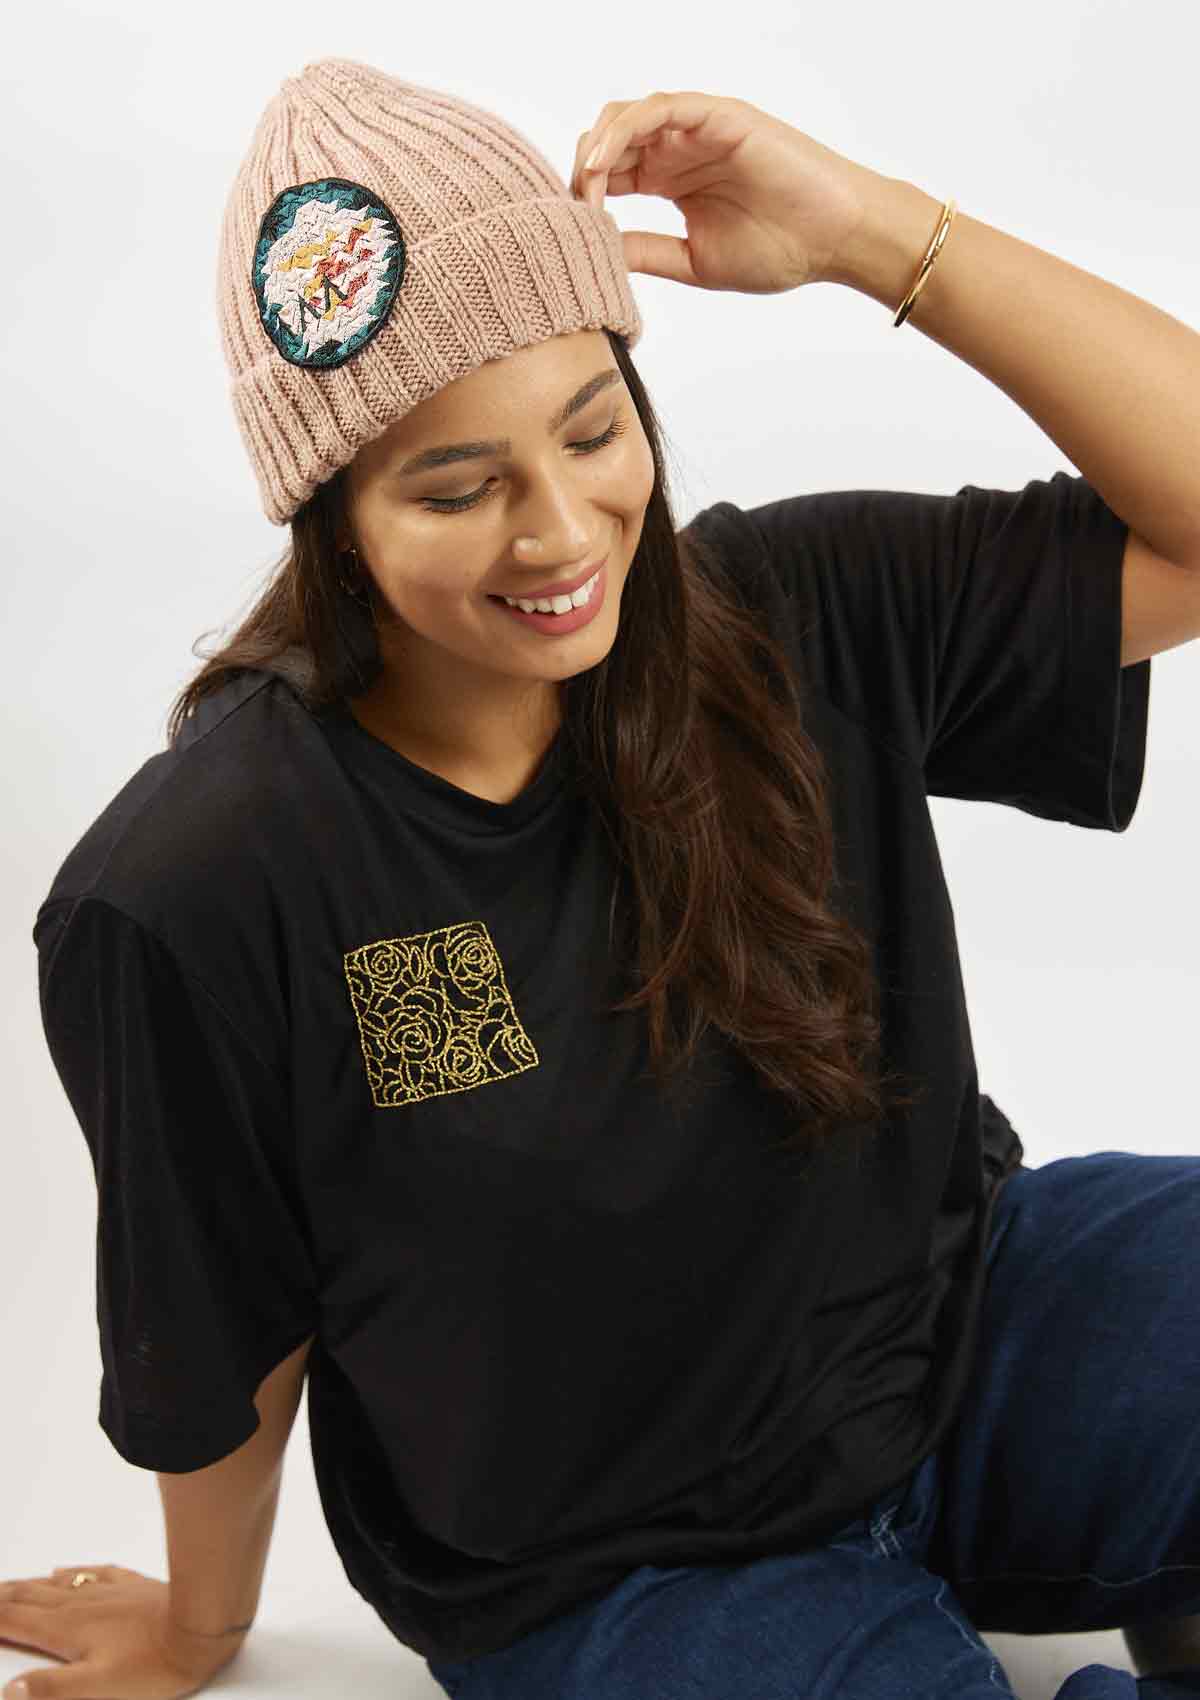 Woman sitting on the floor wearing the Asmuss hand knitted, hand dyed beanie in Pale pink, from a dye made with avocados, and the Asmuss Evelyn tshirt black